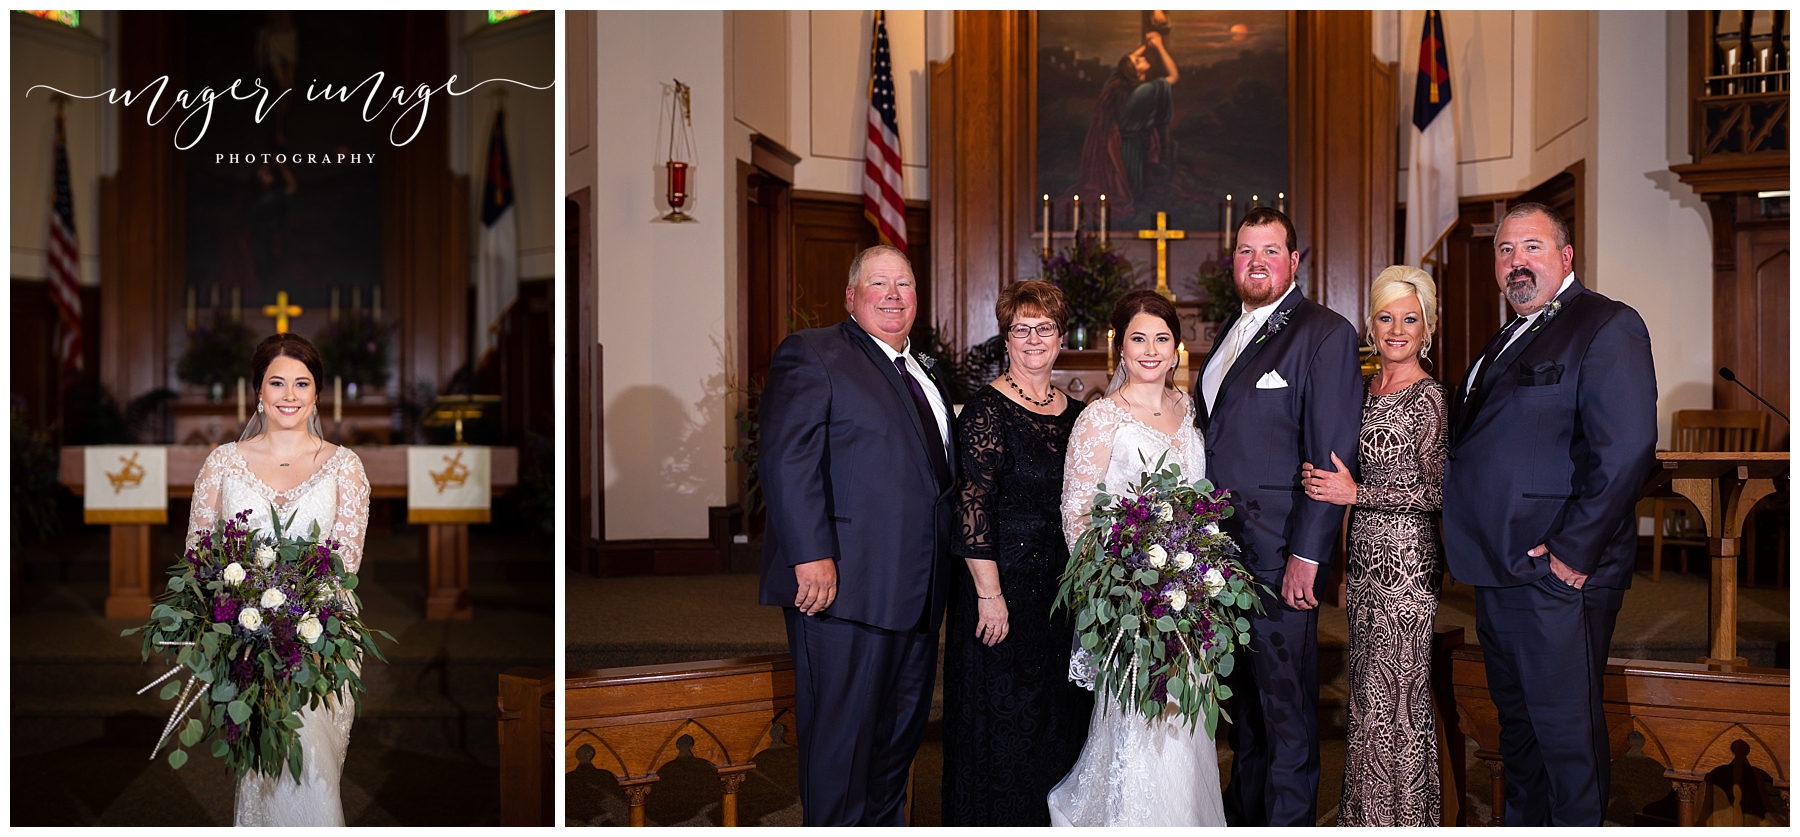 paxton central illinois wedding photographer midwest